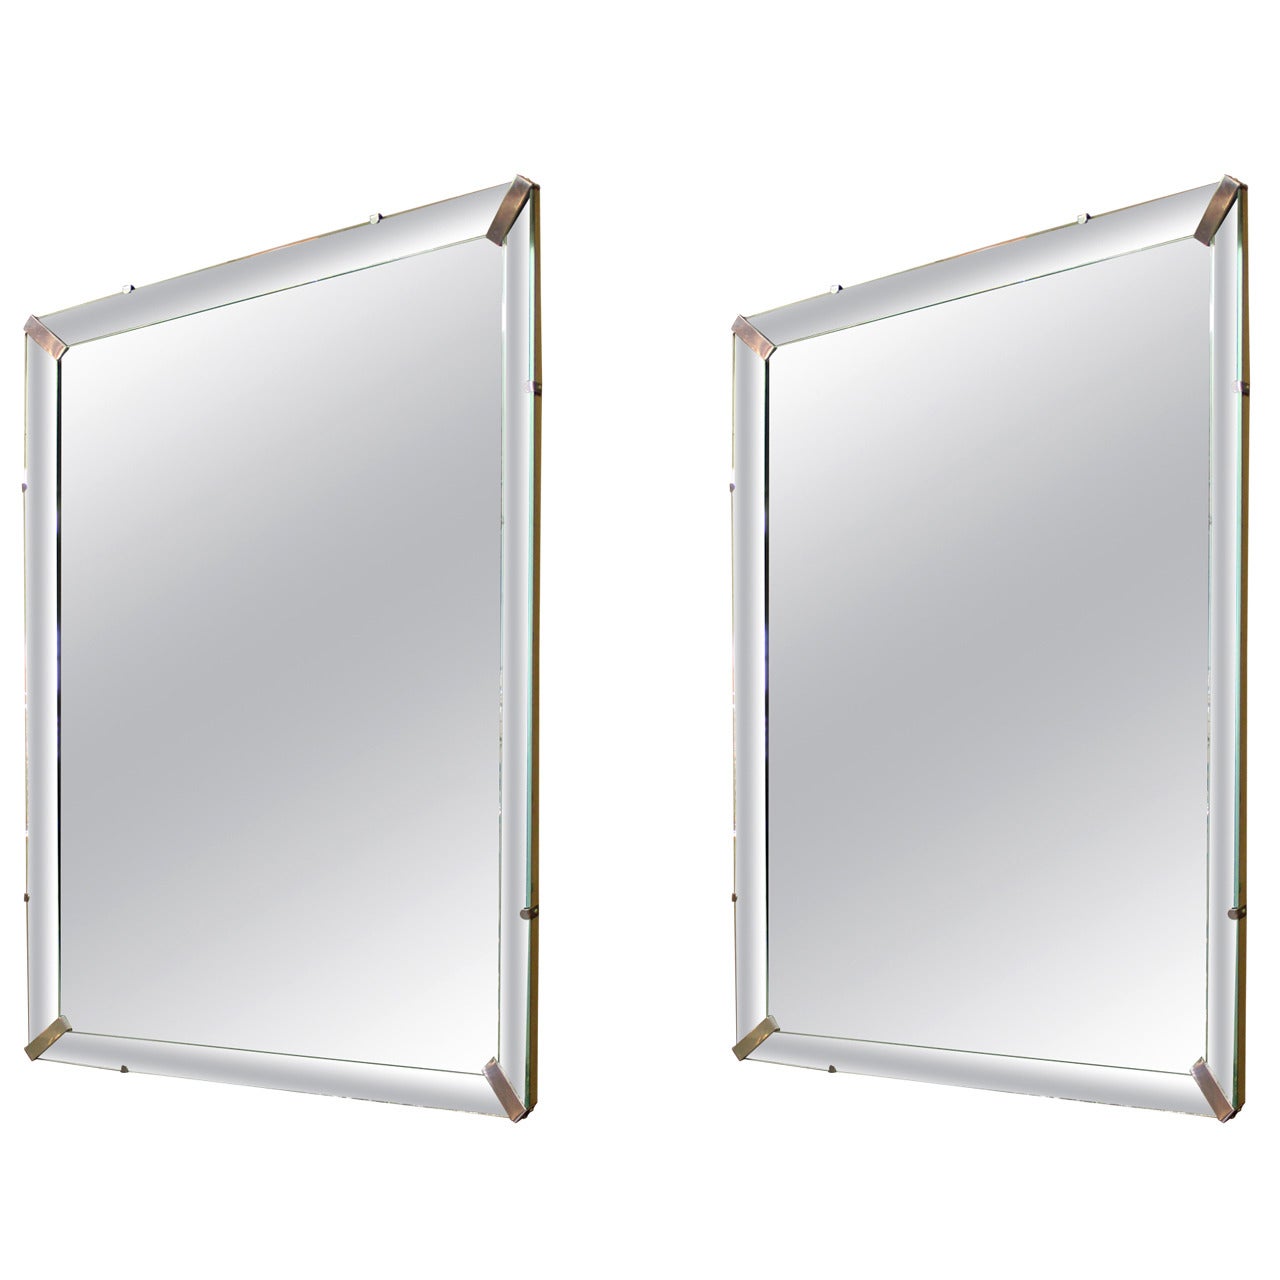 Pair of Mirrors with Brushed Metal Clips, circa 1940s For Sale